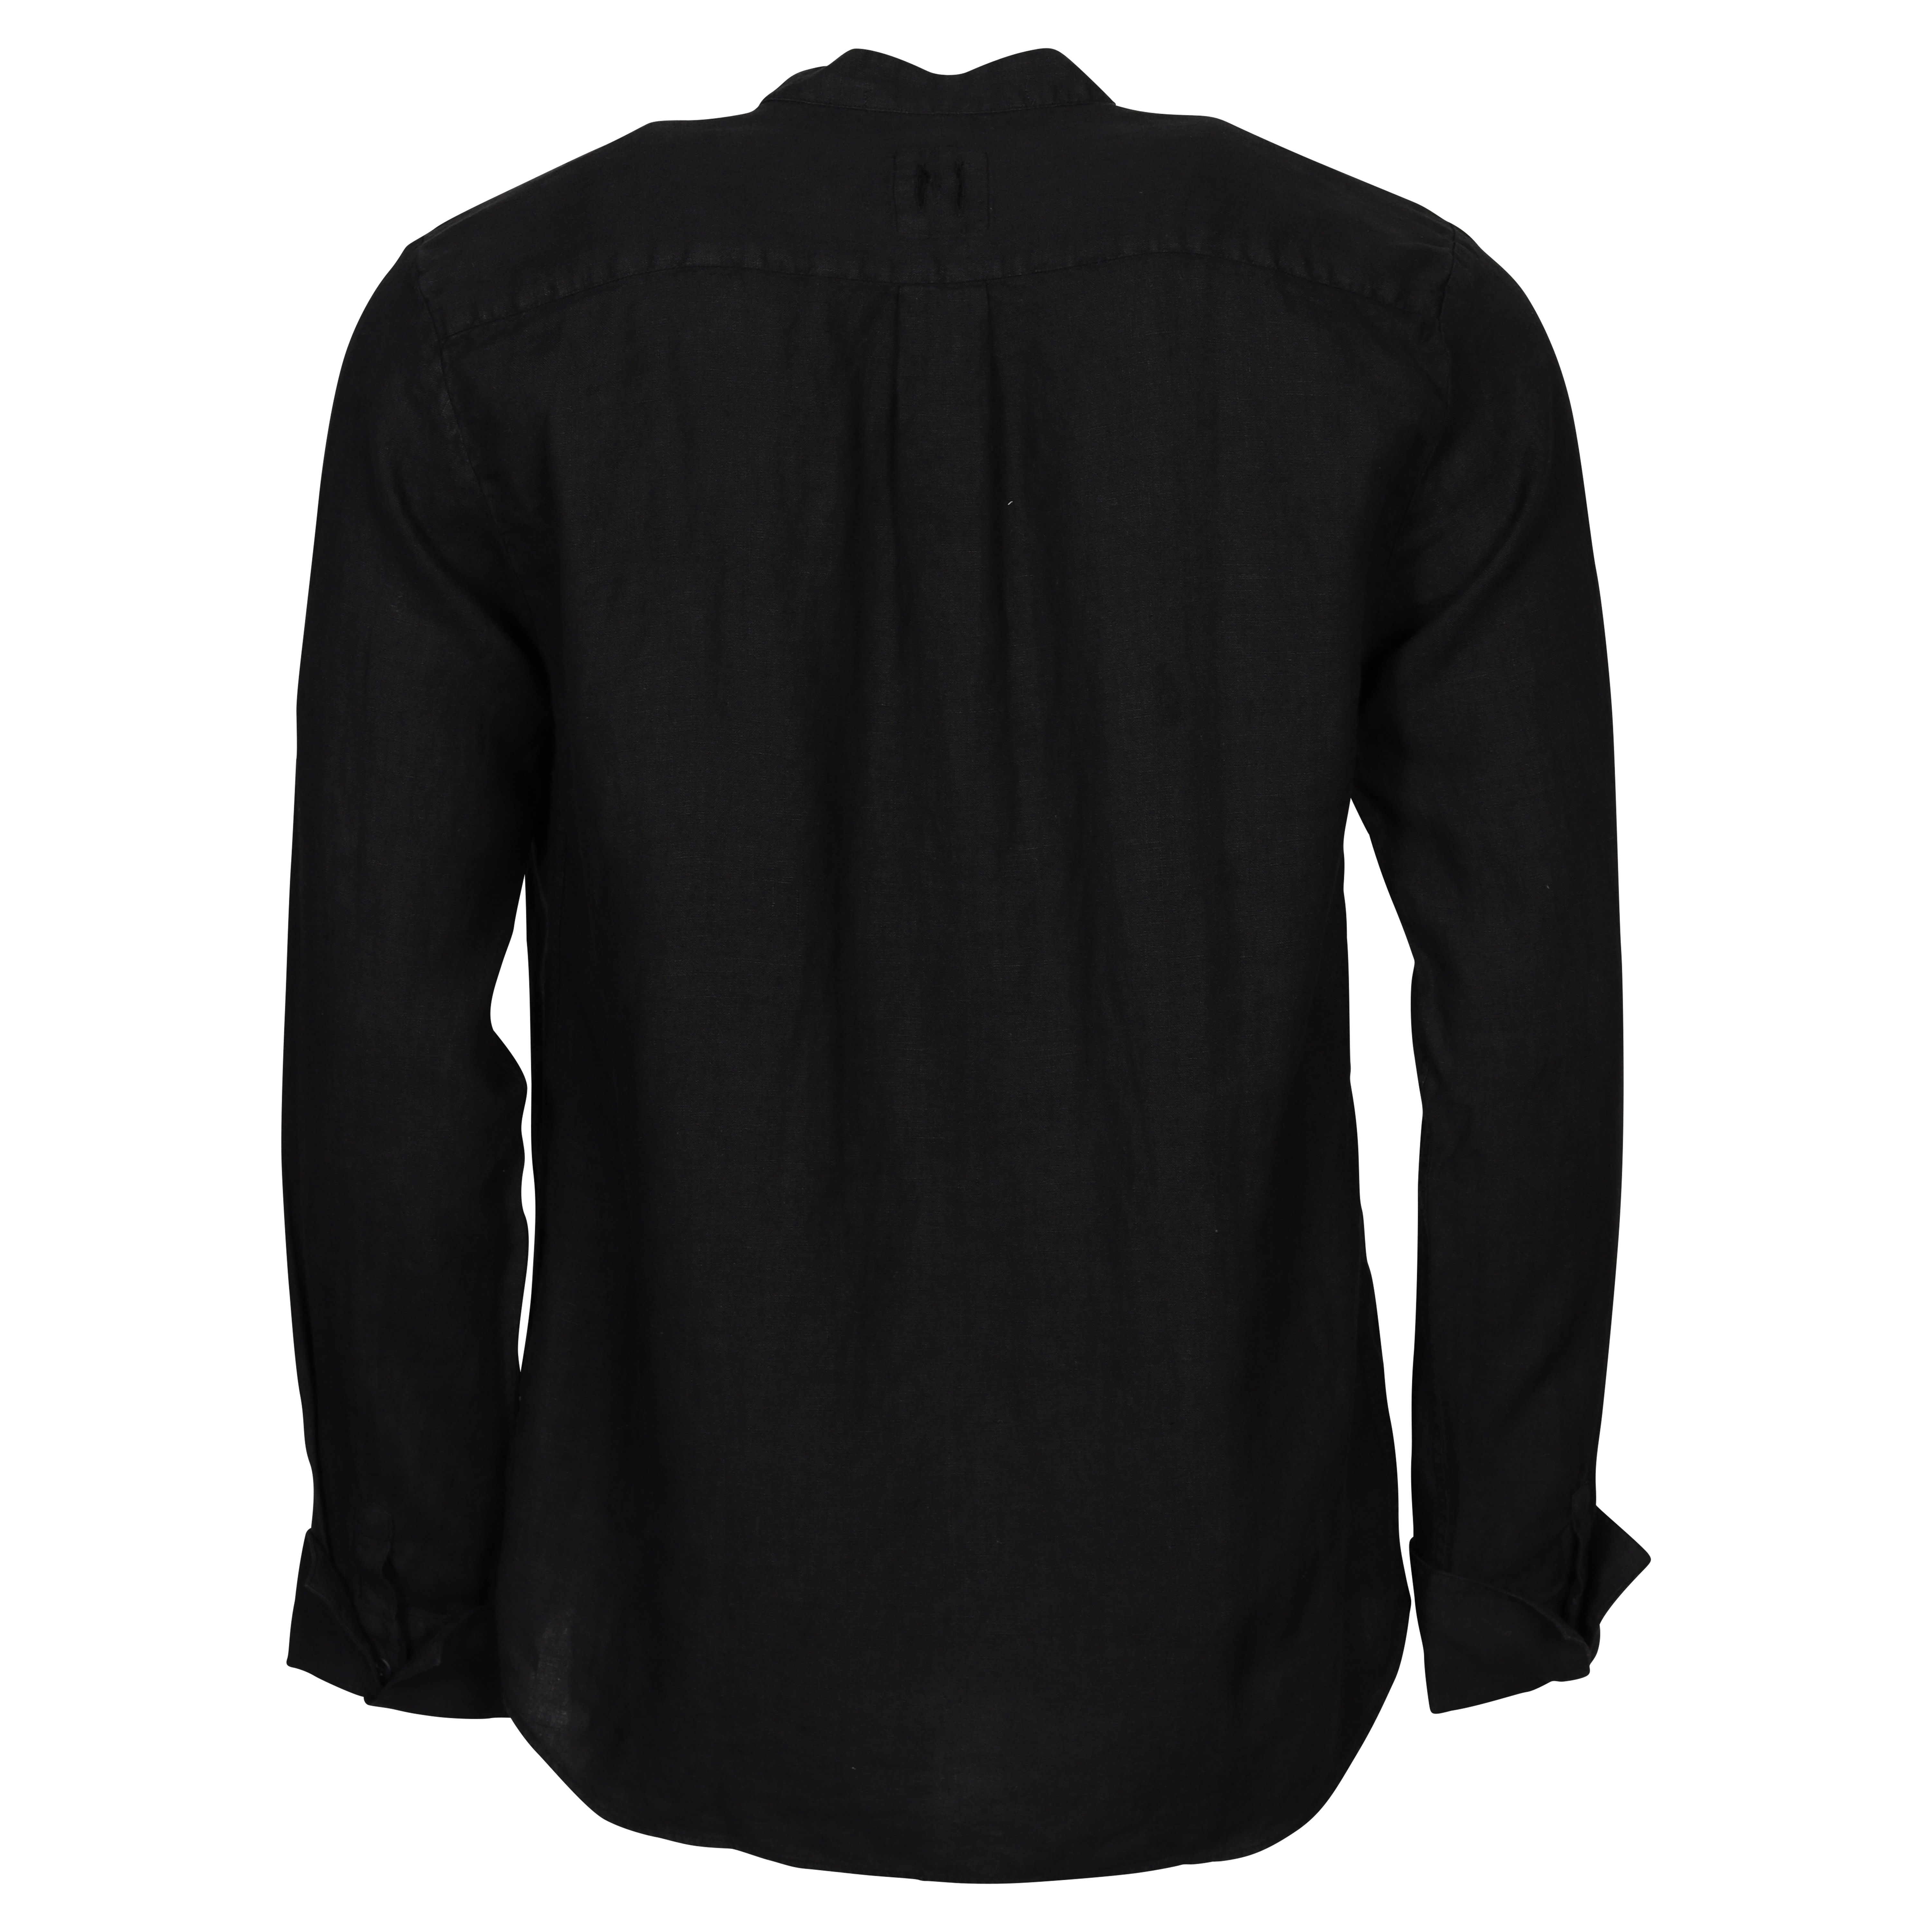 Hannes Roether Linen Tunic Shirt in Black